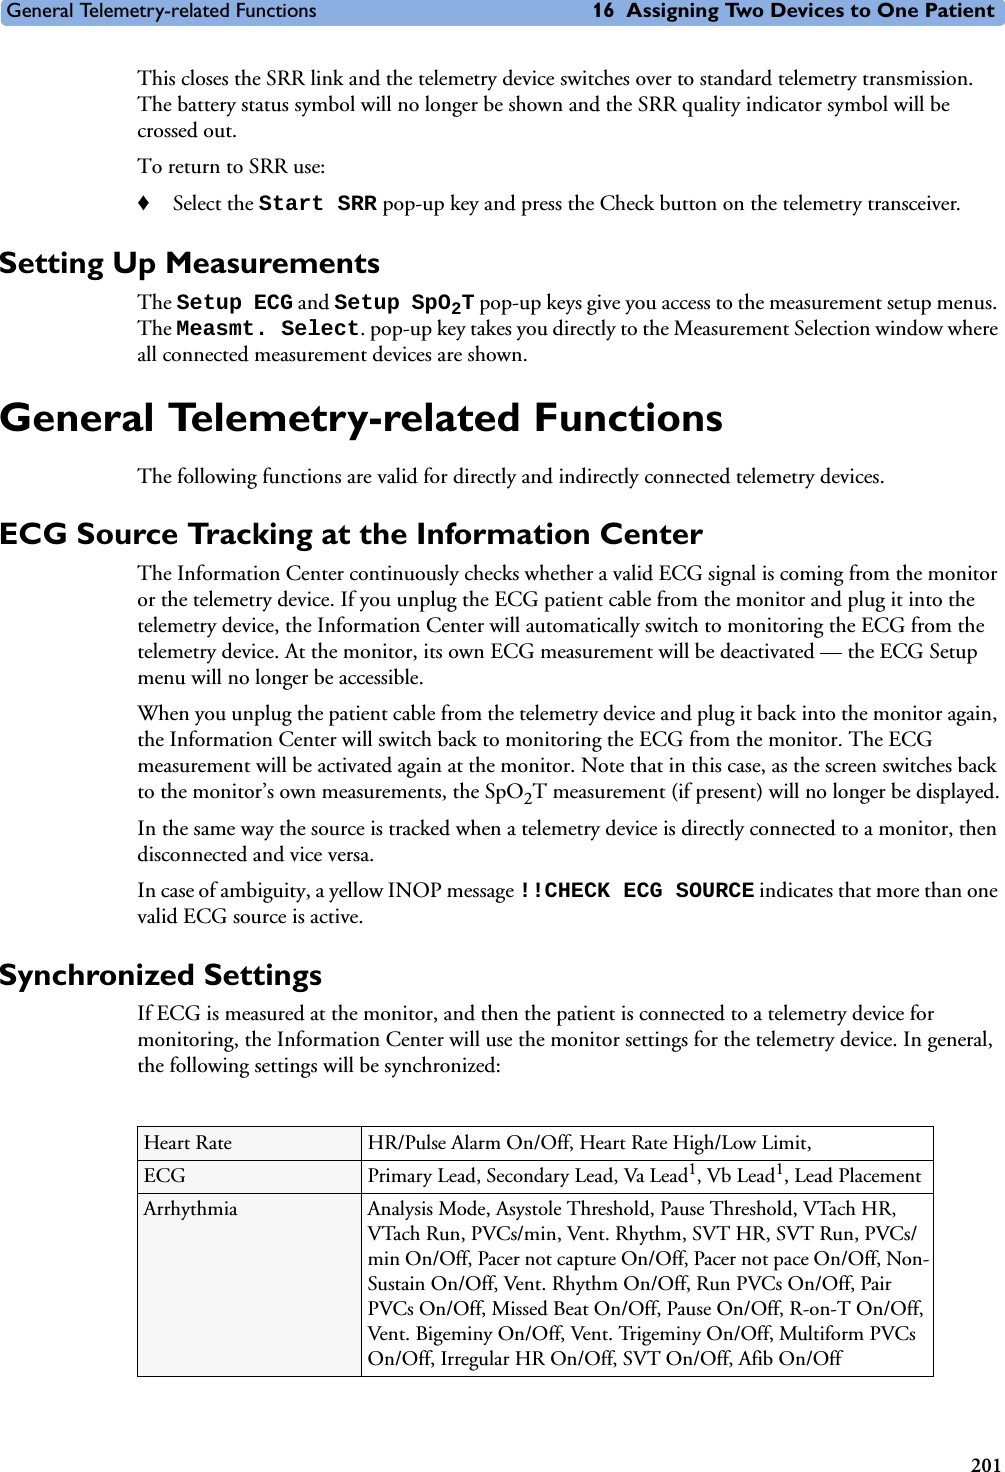 General Telemetry-related Functions 16 Assigning Two Devices to One Patient201This closes the SRR link and the telemetry device switches over to standard telemetry transmission. The battery status symbol will no longer be shown and the SRR quality indicator symbol will be crossed out.To return to SRR use:♦Select the Start SRR pop-up key and press the Check button on the telemetry transceiver.Setting Up MeasurementsThe Setup ECG and Setup SpO2T pop-up keys give you access to the measurement setup menus. The Measmt. Select. pop-up key takes you directly to the Measurement Selection window where all connected measurement devices are shown.General Telemetry-related FunctionsThe following functions are valid for directly and indirectly connected telemetry devices.ECG Source Tracking at the Information CenterThe Information Center continuously checks whether a valid ECG signal is coming from the monitor or the telemetry device. If you unplug the ECG patient cable from the monitor and plug it into the telemetry device, the Information Center will automatically switch to monitoring the ECG from the telemetry device. At the monitor, its own ECG measurement will be deactivated — the ECG Setup menu will no longer be accessible.When you unplug the patient cable from the telemetry device and plug it back into the monitor again, the Information Center will switch back to monitoring the ECG from the monitor. The ECG measurement will be activated again at the monitor. Note that in this case, as the screen switches back to the monitor’s own measurements, the SpO2T measurement (if present) will no longer be displayed.In the same way the source is tracked when a telemetry device is directly connected to a monitor, then disconnected and vice versa. In case of ambiguity, a yellow INOP message !!CHECK ECG SOURCE indicates that more than one valid ECG source is active. Synchronized SettingsIf ECG is measured at the monitor, and then the patient is connected to a telemetry device for monitoring, the Information Center will use the monitor settings for the telemetry device. In general, the following settings will be synchronized:Heart Rate HR/Pulse Alarm On/Off, Heart Rate High/Low Limit, ECG Primary Lead, Secondary Lead, Va Lead1, Vb Lead1, Lead PlacementArrhythmia Analysis Mode, Asystole Threshold, Pause Threshold, VTach HR, VTach Run, PVCs/min, Vent. Rhythm, SVT HR, SVT Run, PVCs/min On/Off, Pacer not capture On/Off, Pacer not pace On/Off, Non-Sustain On/Off, Vent. Rhythm On/Off, Run PVCs On/Off, Pair PVCs On/Off, Missed Beat On/Off, Pause On/Off, R-on-T On/Off, Vent. Bigeminy On/Off, Vent. Trigeminy On/Off, Multiform PVCs On/Off, Irregular HR On/Off, SVT On/Off, Afib On/Off